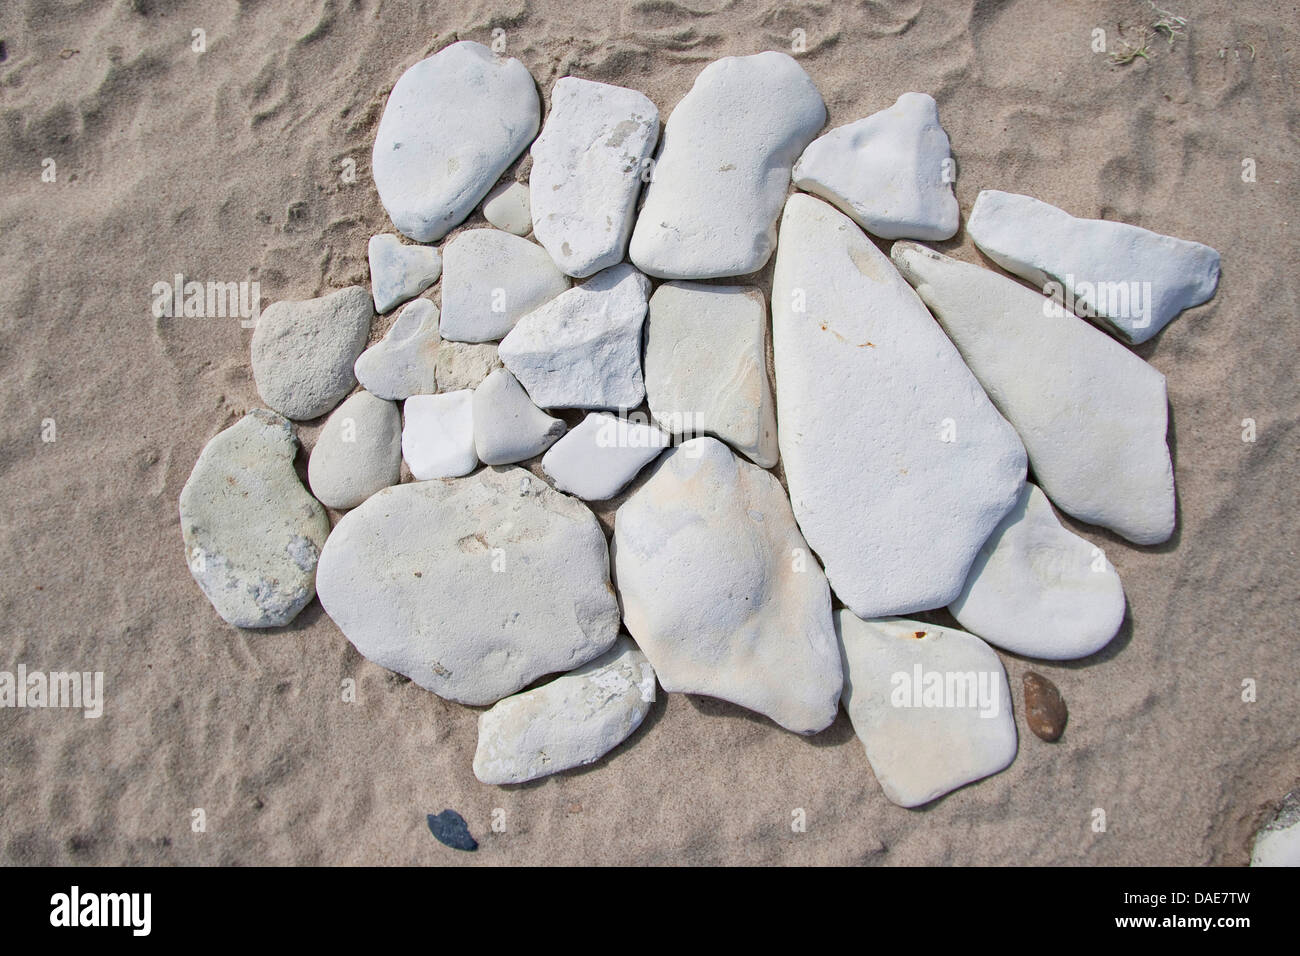 mosaik made of stones at the sand beach, Germany Stock Photo